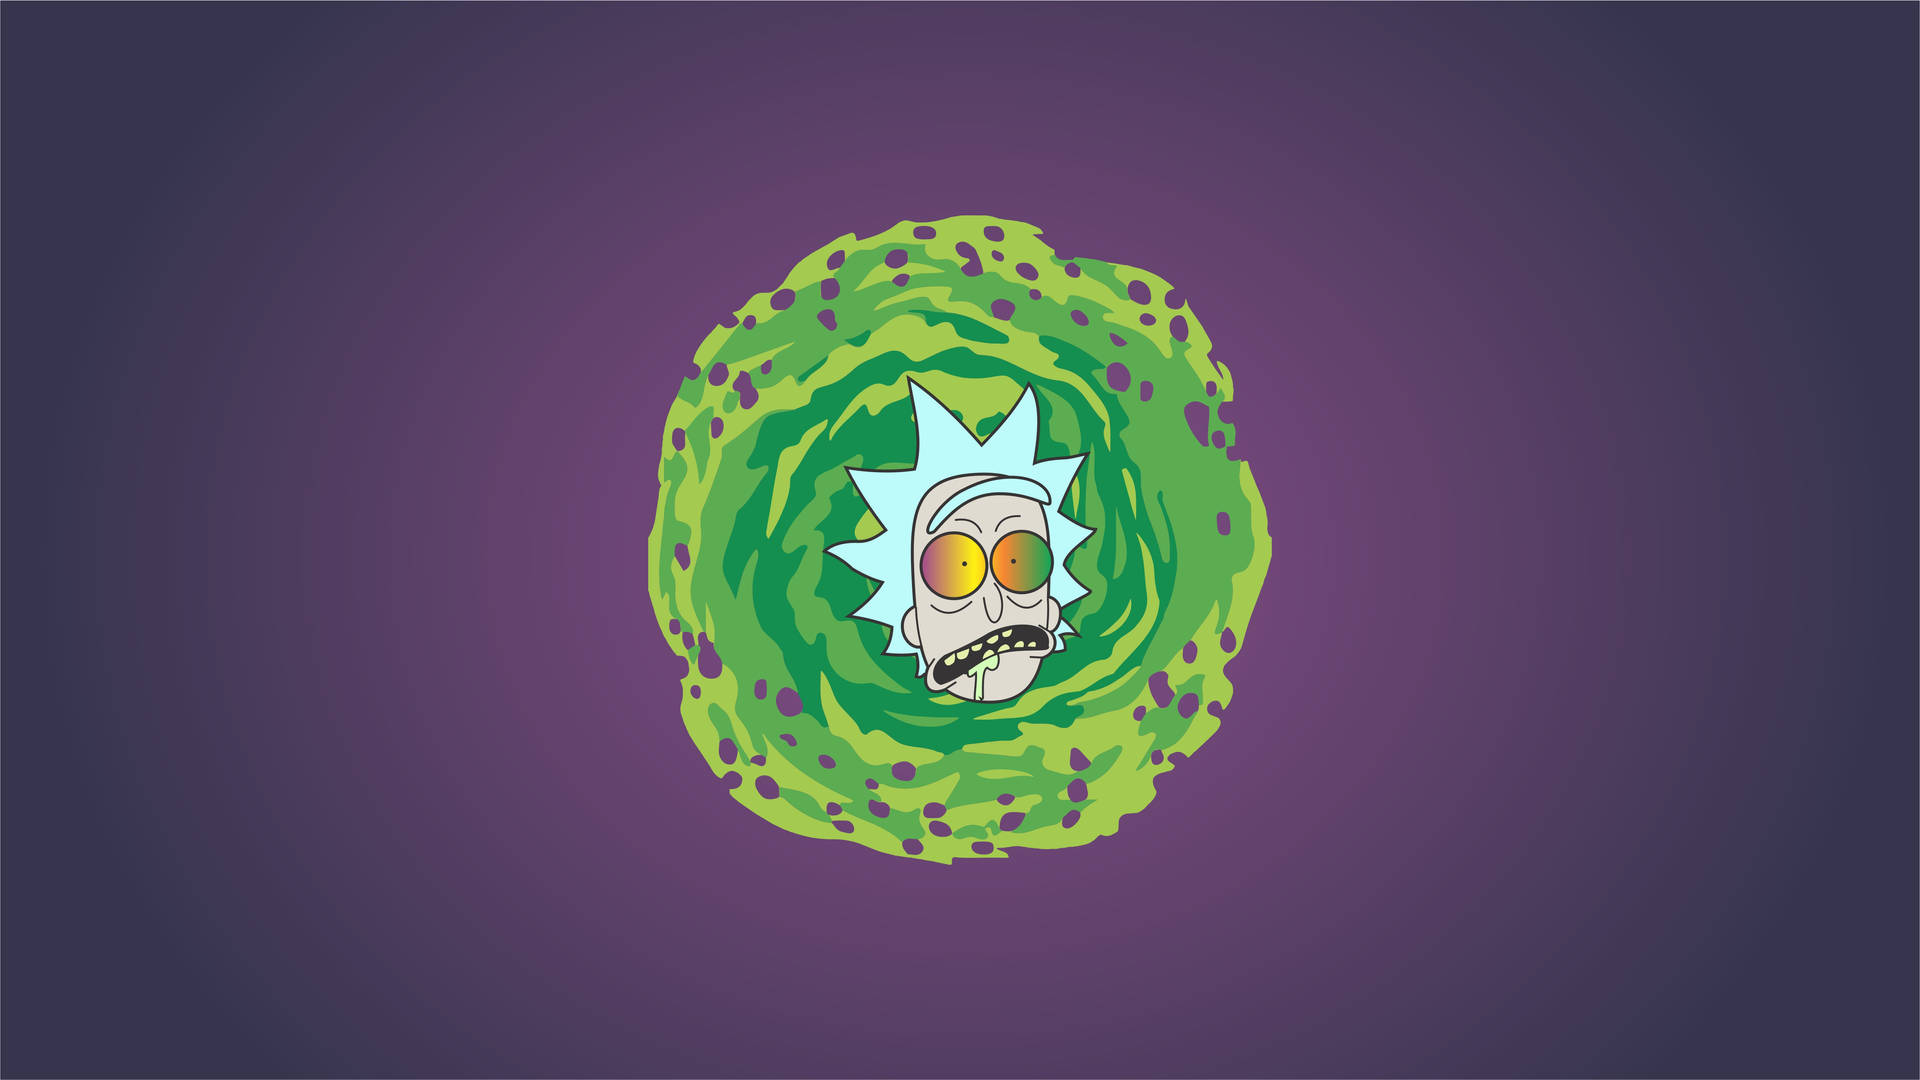 Inebriated Rick And Morty PC 4K Wallpaper